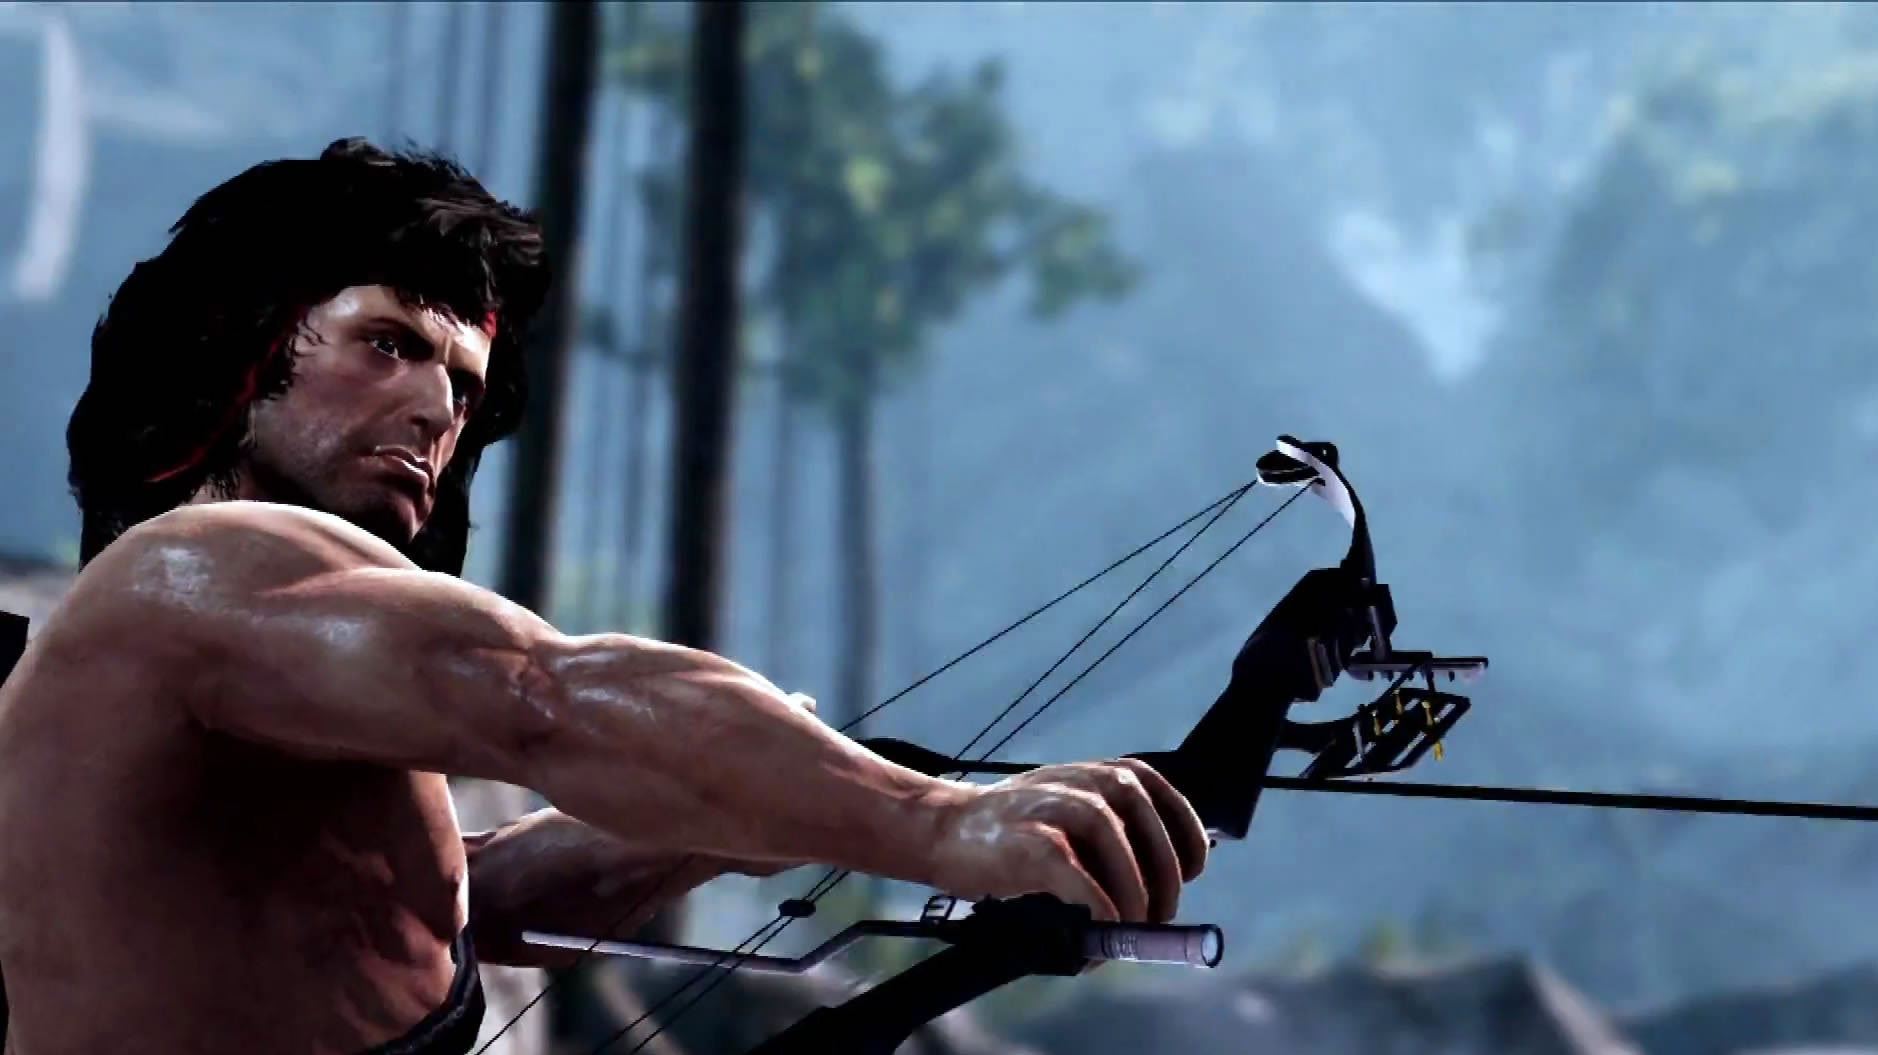 rambo in video games download